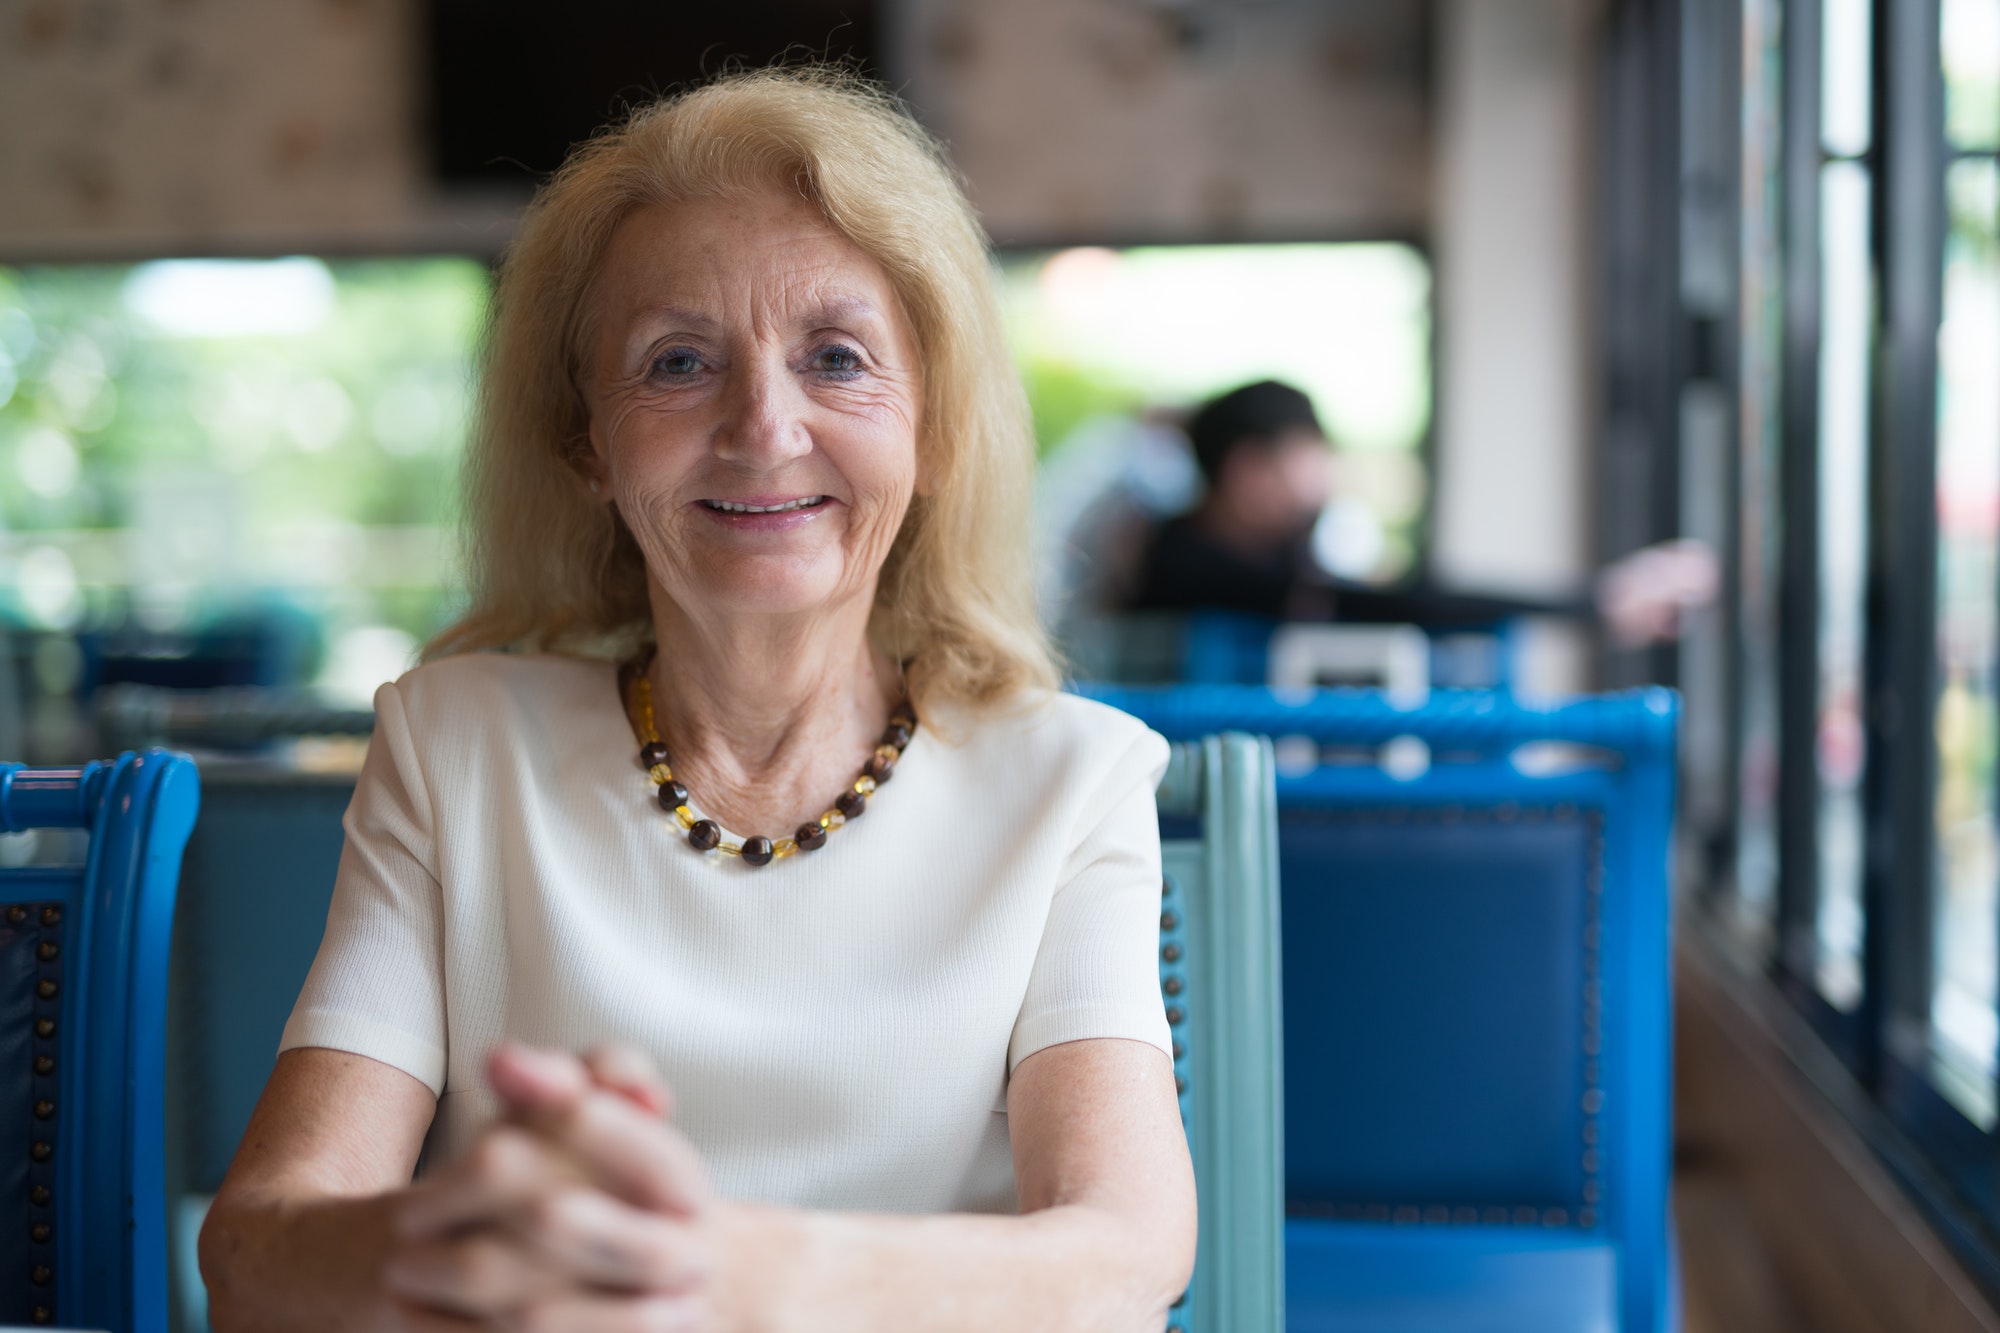 Portrait of happy senior woman smiling and looking at camera while sitting at restaurant